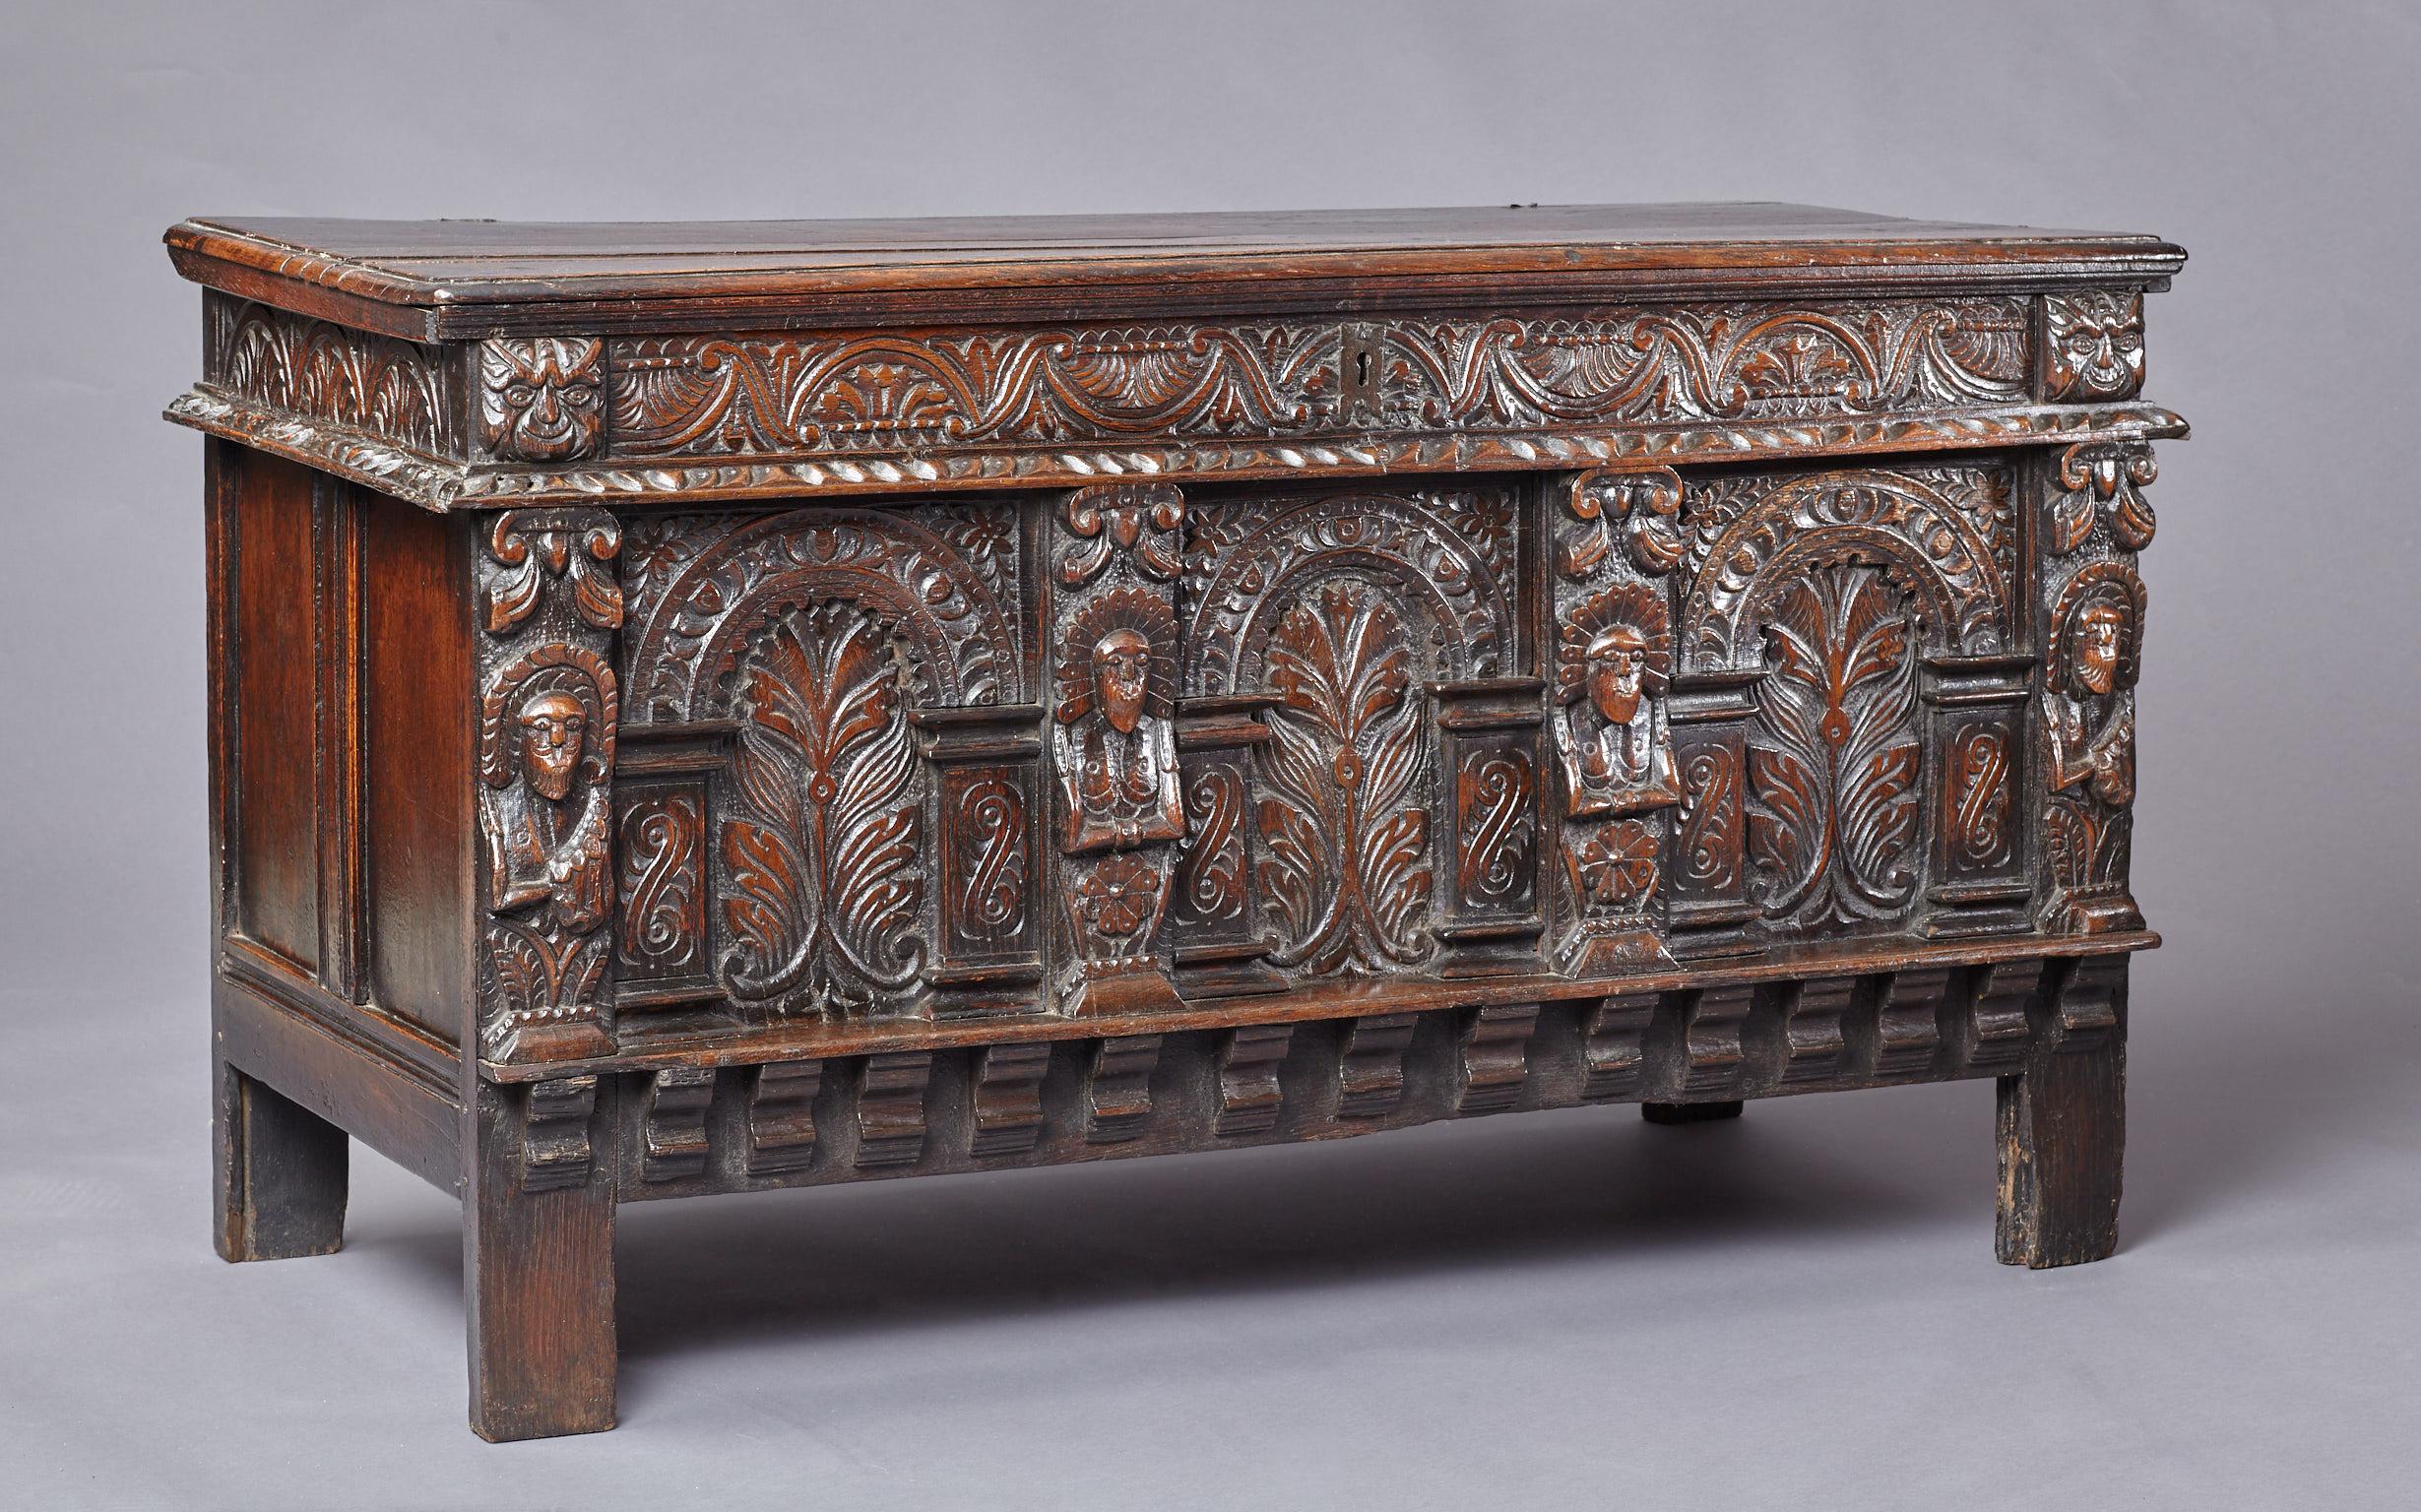 Late Elizabethan oak chest, West Country, Somerset, circa 1600.

The two plank top retaining original wrought iron loop hinges above a floral lunette carved frieze flanked by a pair of Green man masks, above three arcaded panels carved with foliate